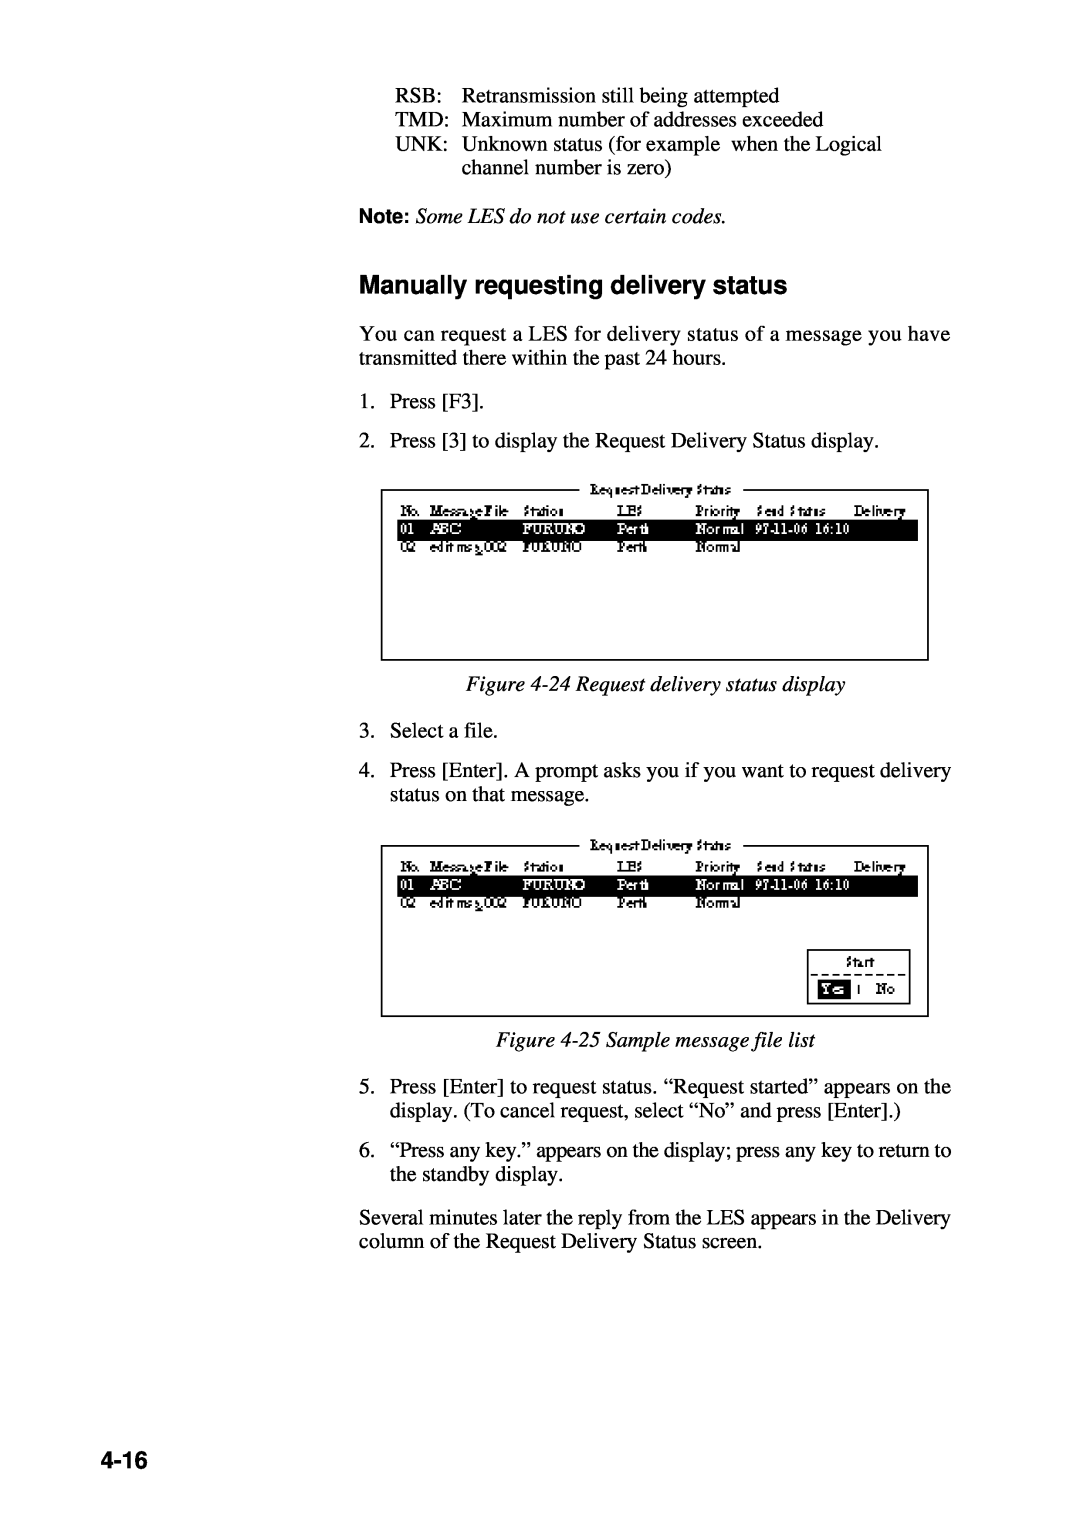 Furuno RC-1500-1T manual Manually requesting delivery status, 4-16, Note Some LES do not use certain codes 